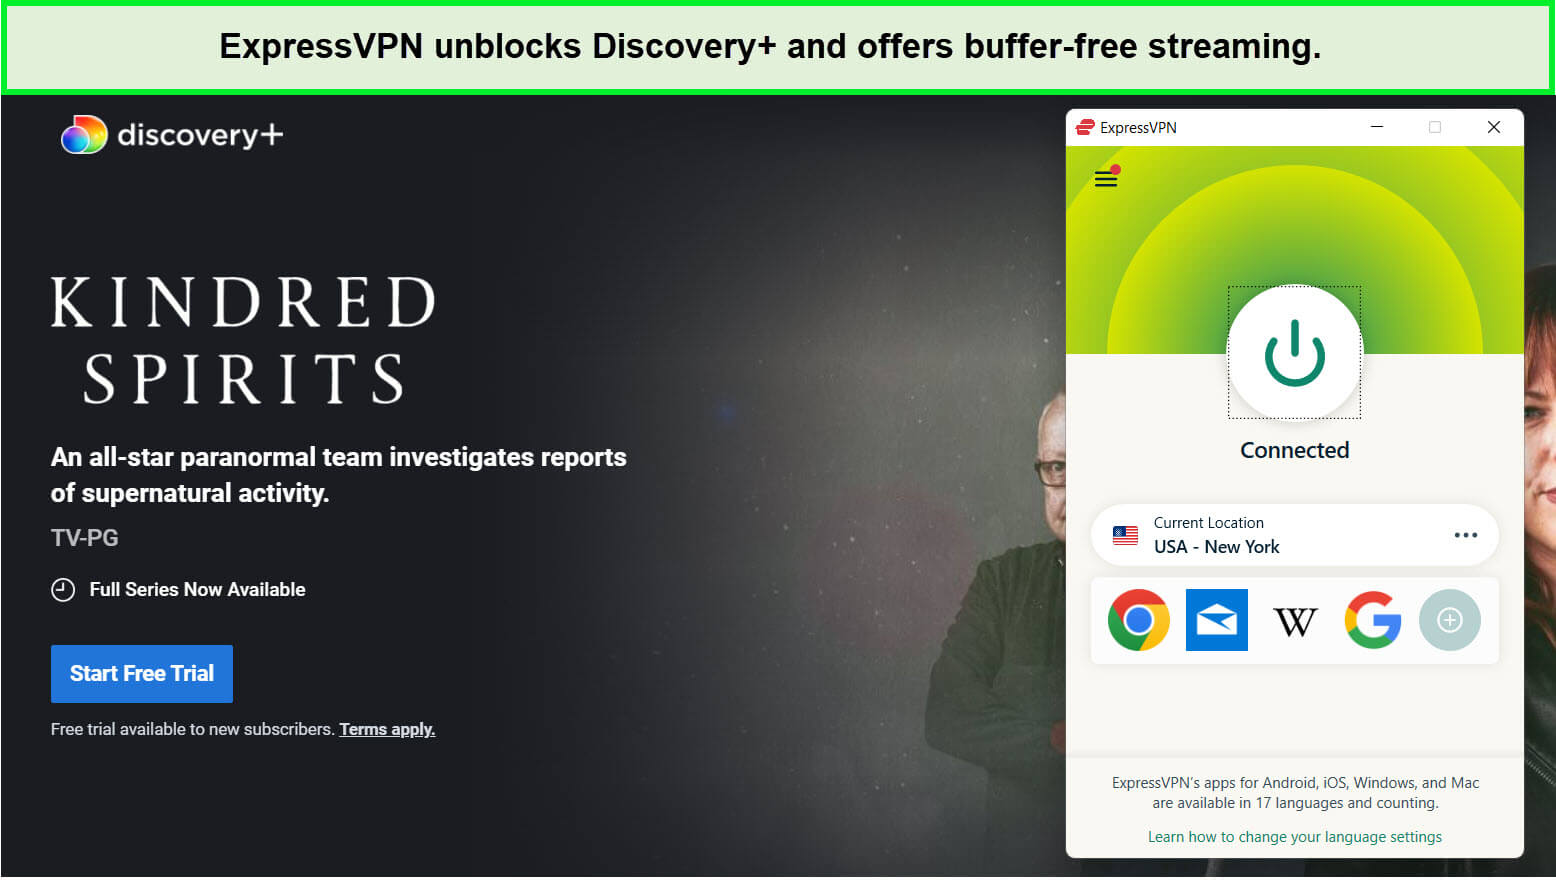 expressvpn-unblocks-kindred-spirits-s7-on-discovery-plus-in-canada